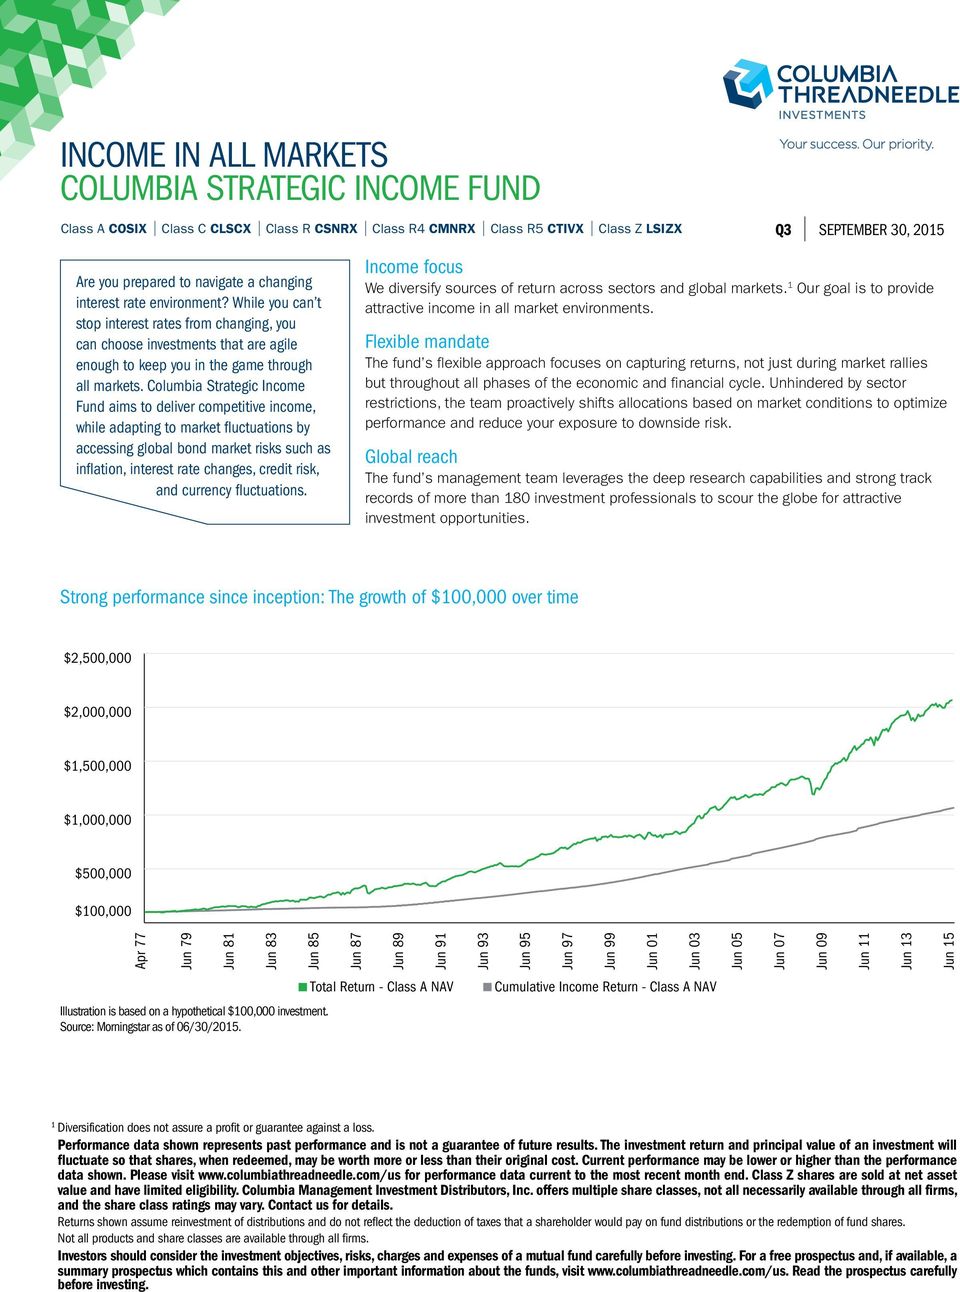 Columbia Strategic Income Fund aims to deliver competitive income, while adapting to market fluctuations by accessing global bond market risks such as inflation, interest rate changes, credit risk,